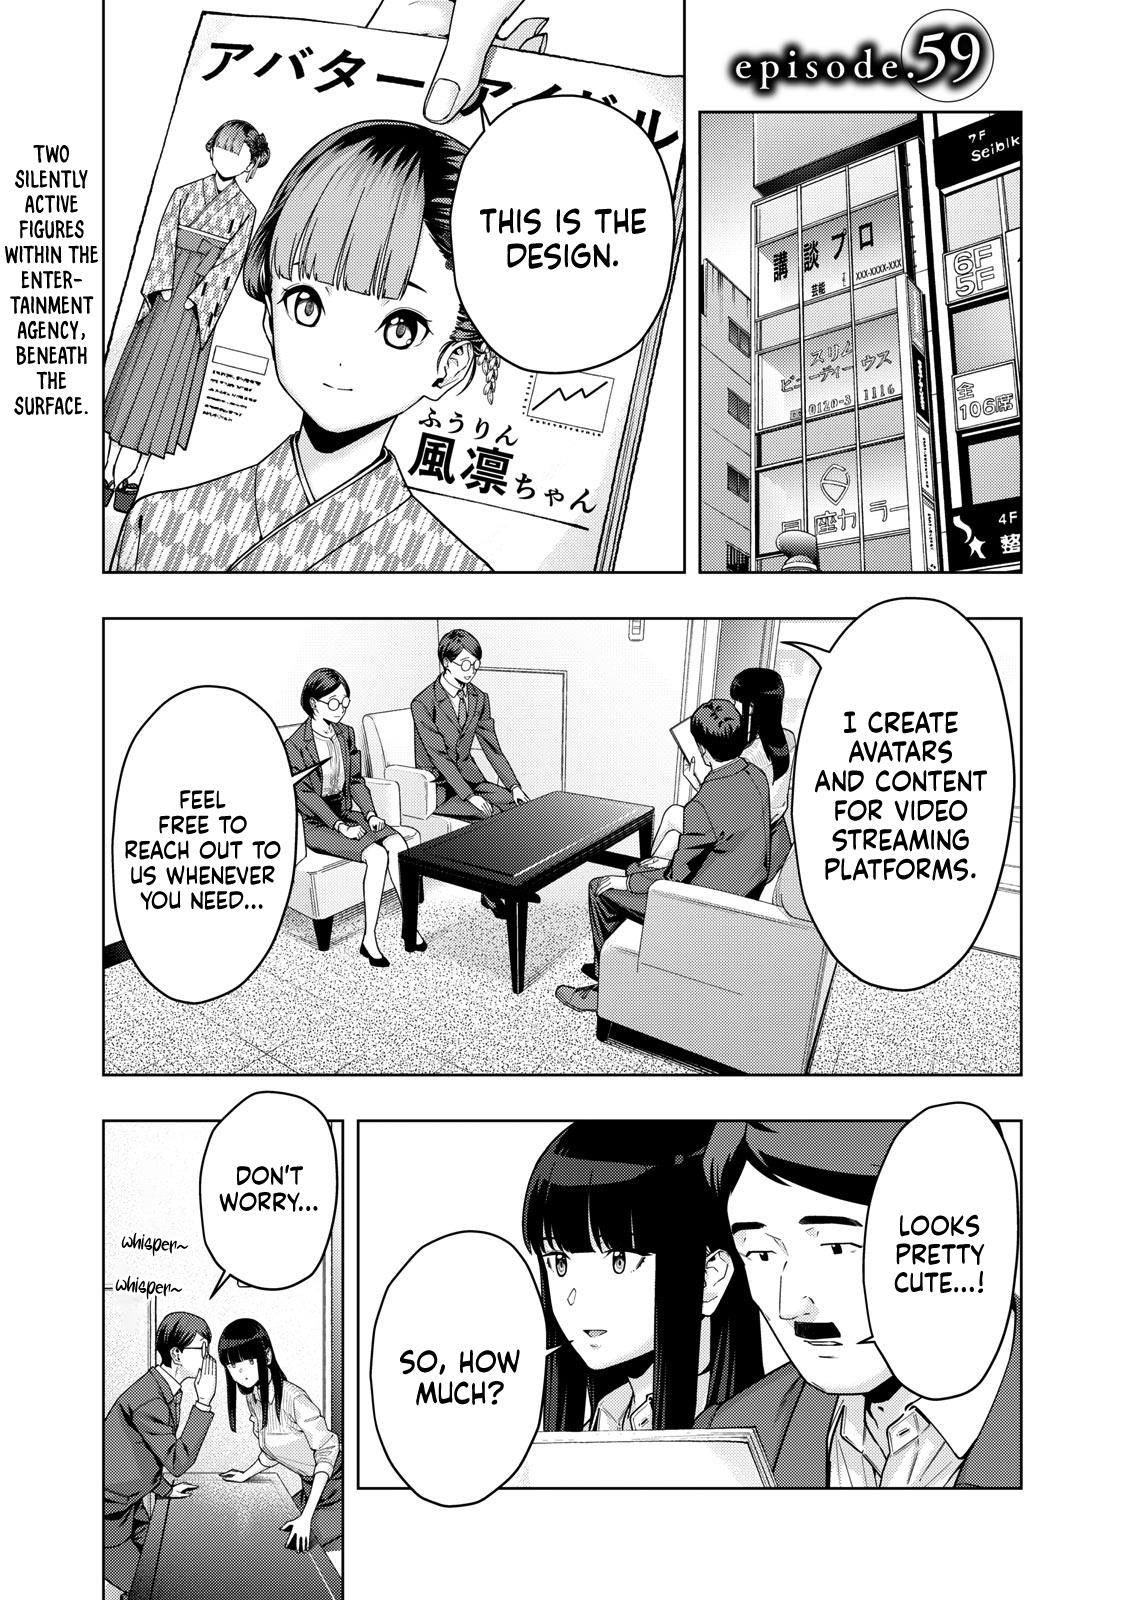 My Girlfriend's Friend Vol.4 Chapter 59 - Picture 2